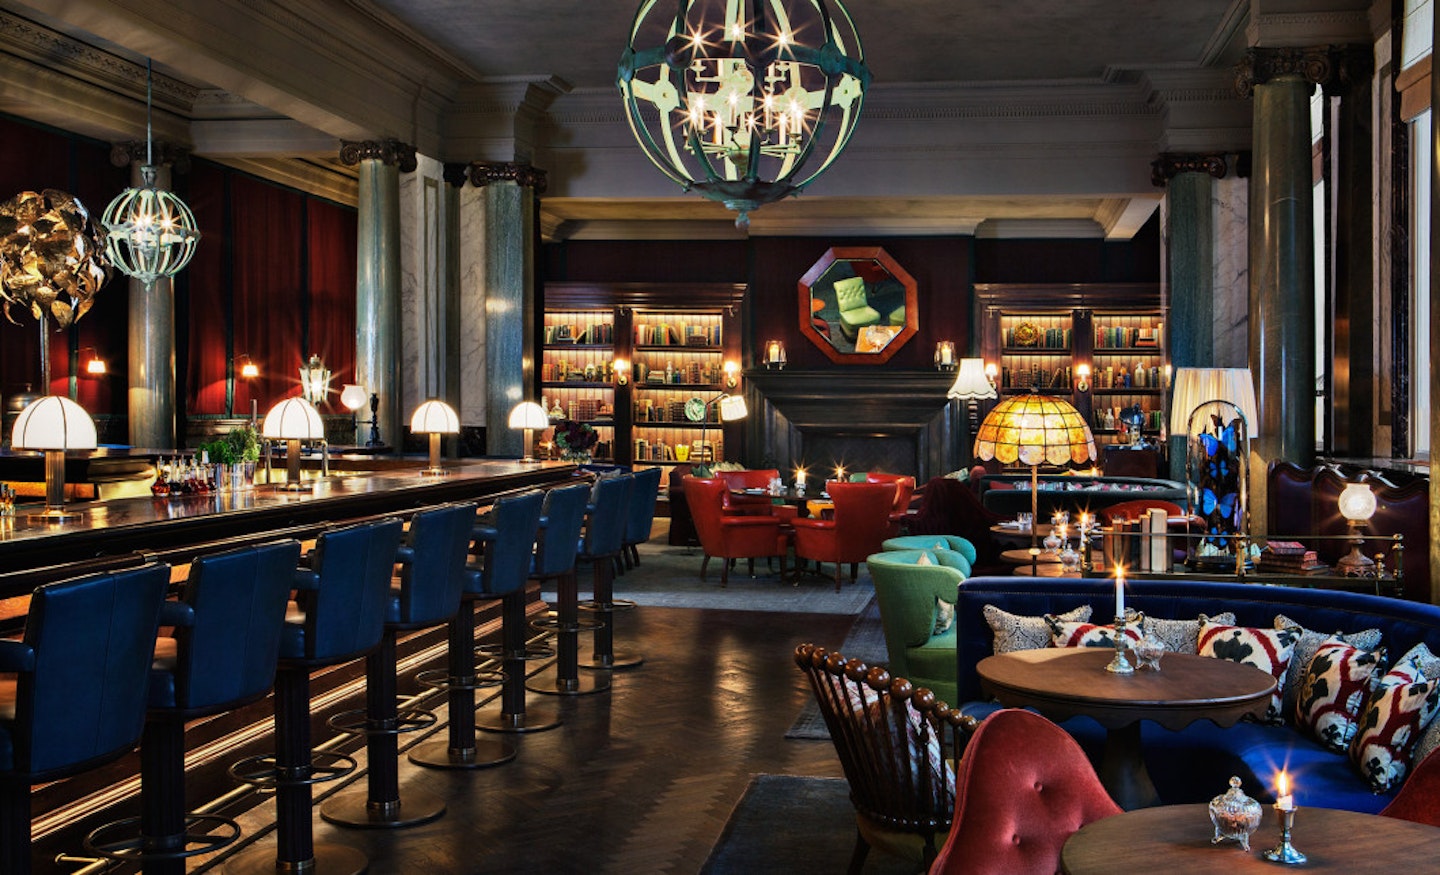 Head to Scarfes Bar for cocktails, rare whiskies, comfort food and live jazz